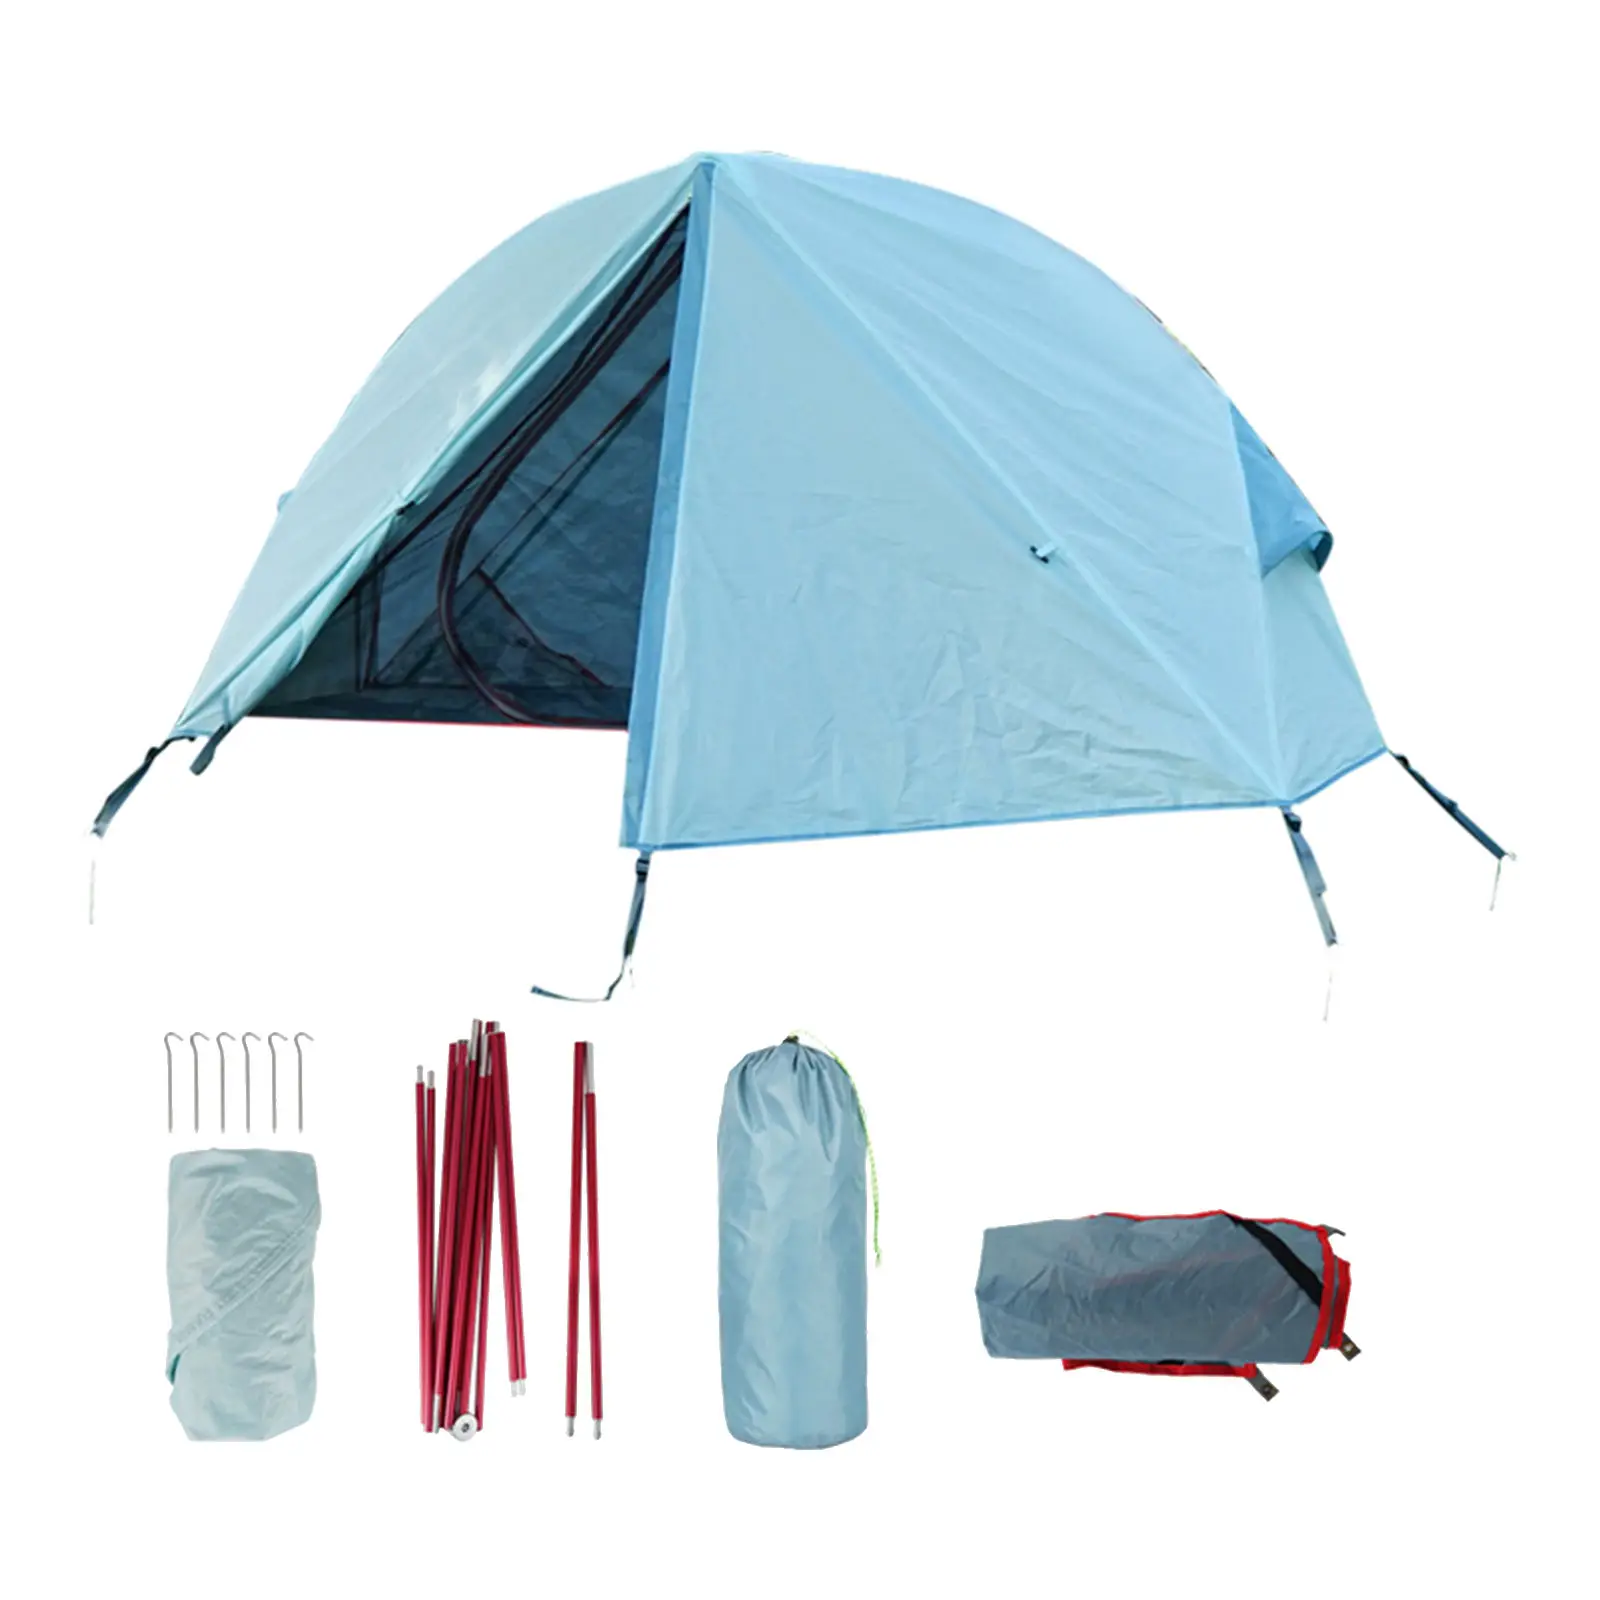 Camping Tent Double Layer Waterproof One Person Ultralight Family Tent Easy Set Up for Hiking Fishing Beach